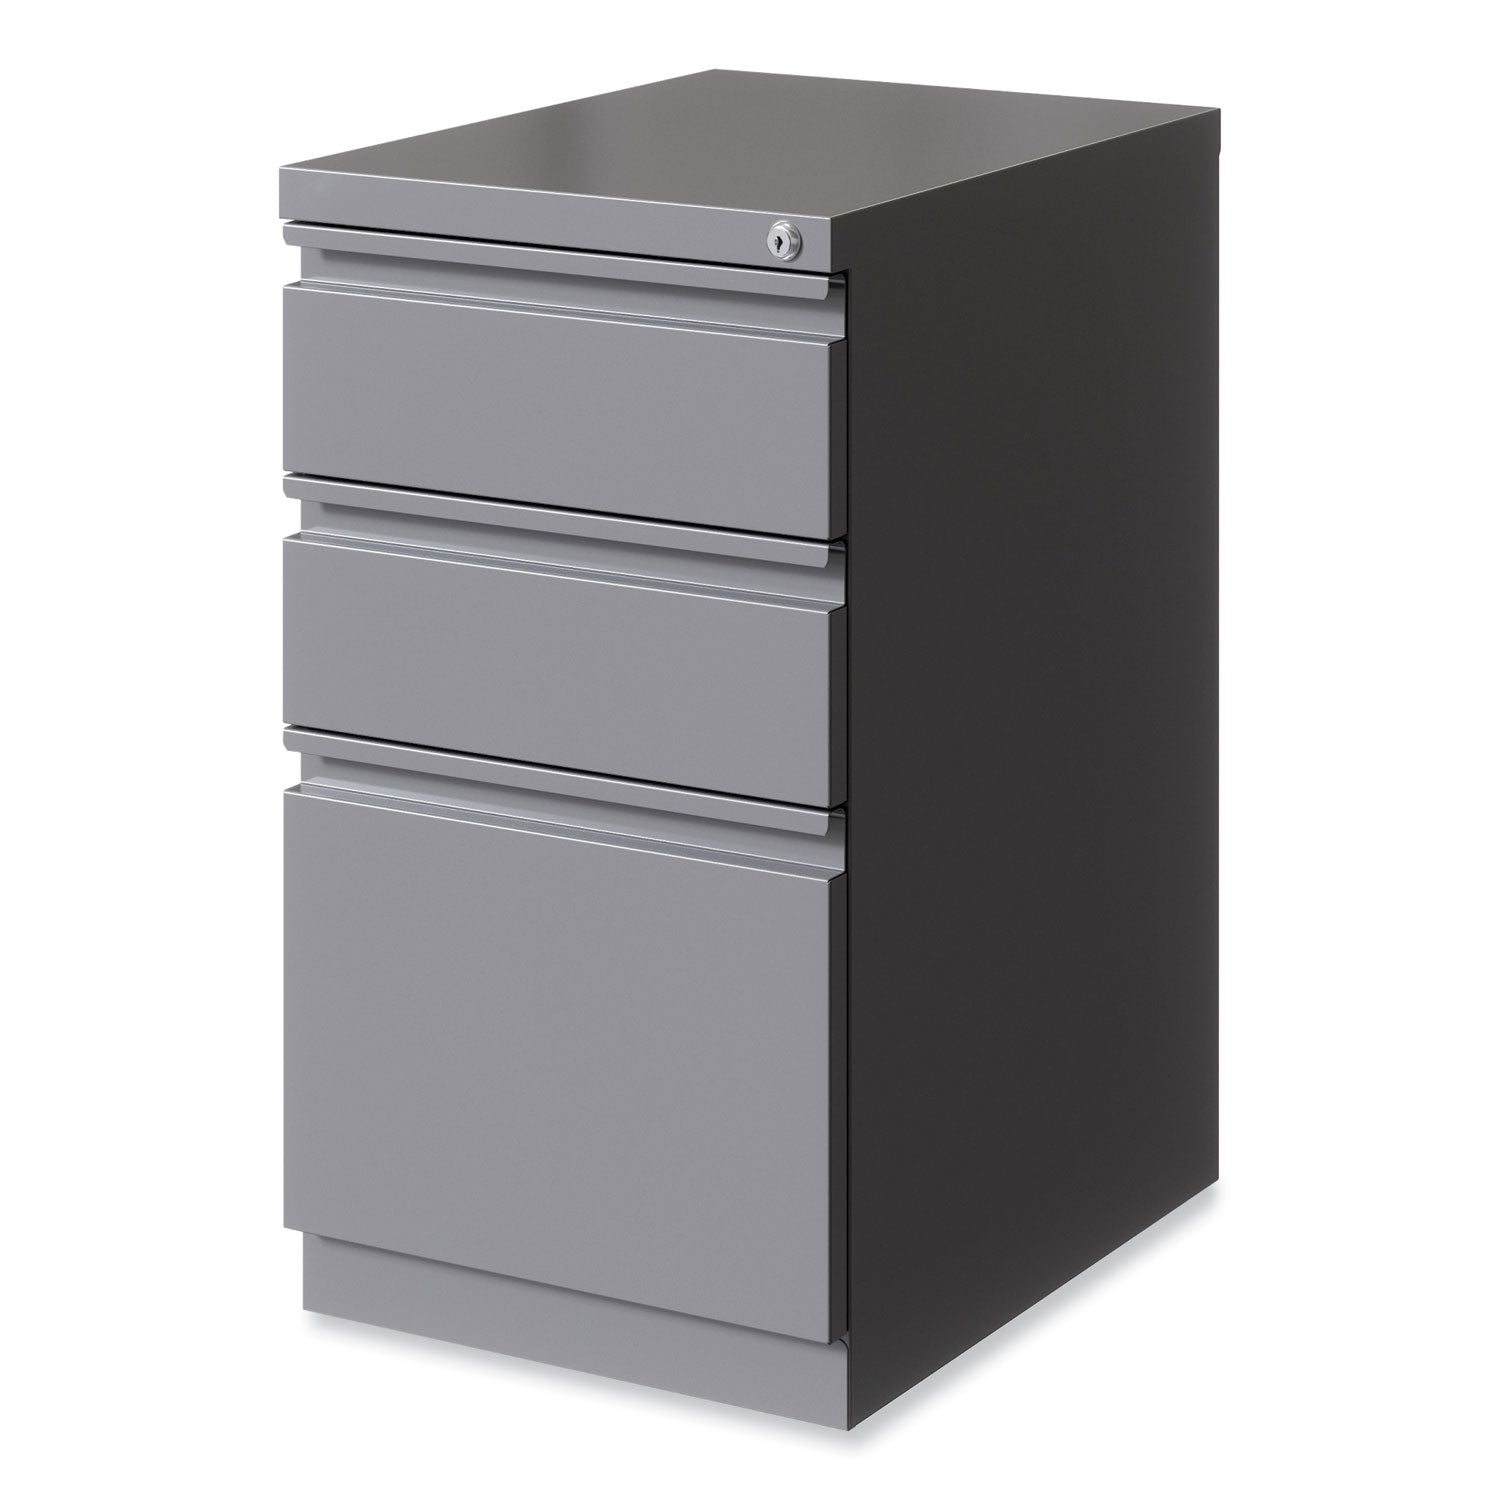 full-width-pull-20-deep-mobile-pedestal-file-box-box-file-letter-arctic-silver-15x1988x2775ships-in-4-6-business-days_hid24110 - 2